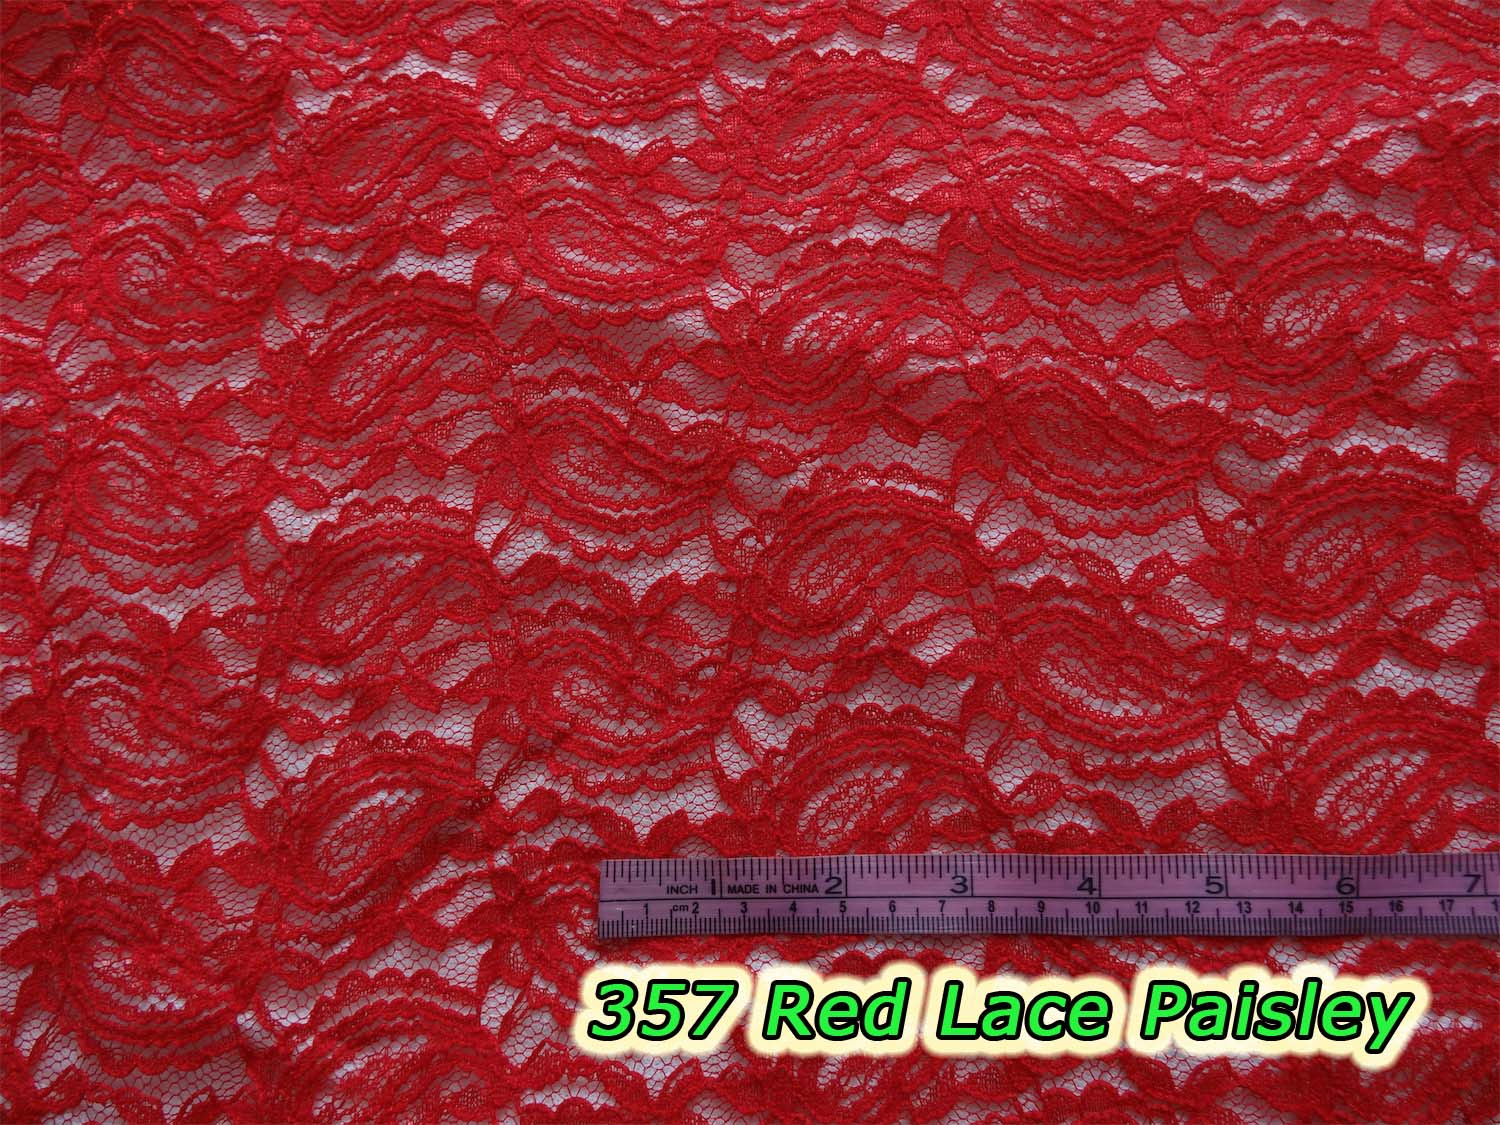 357 Red Lace Paisley